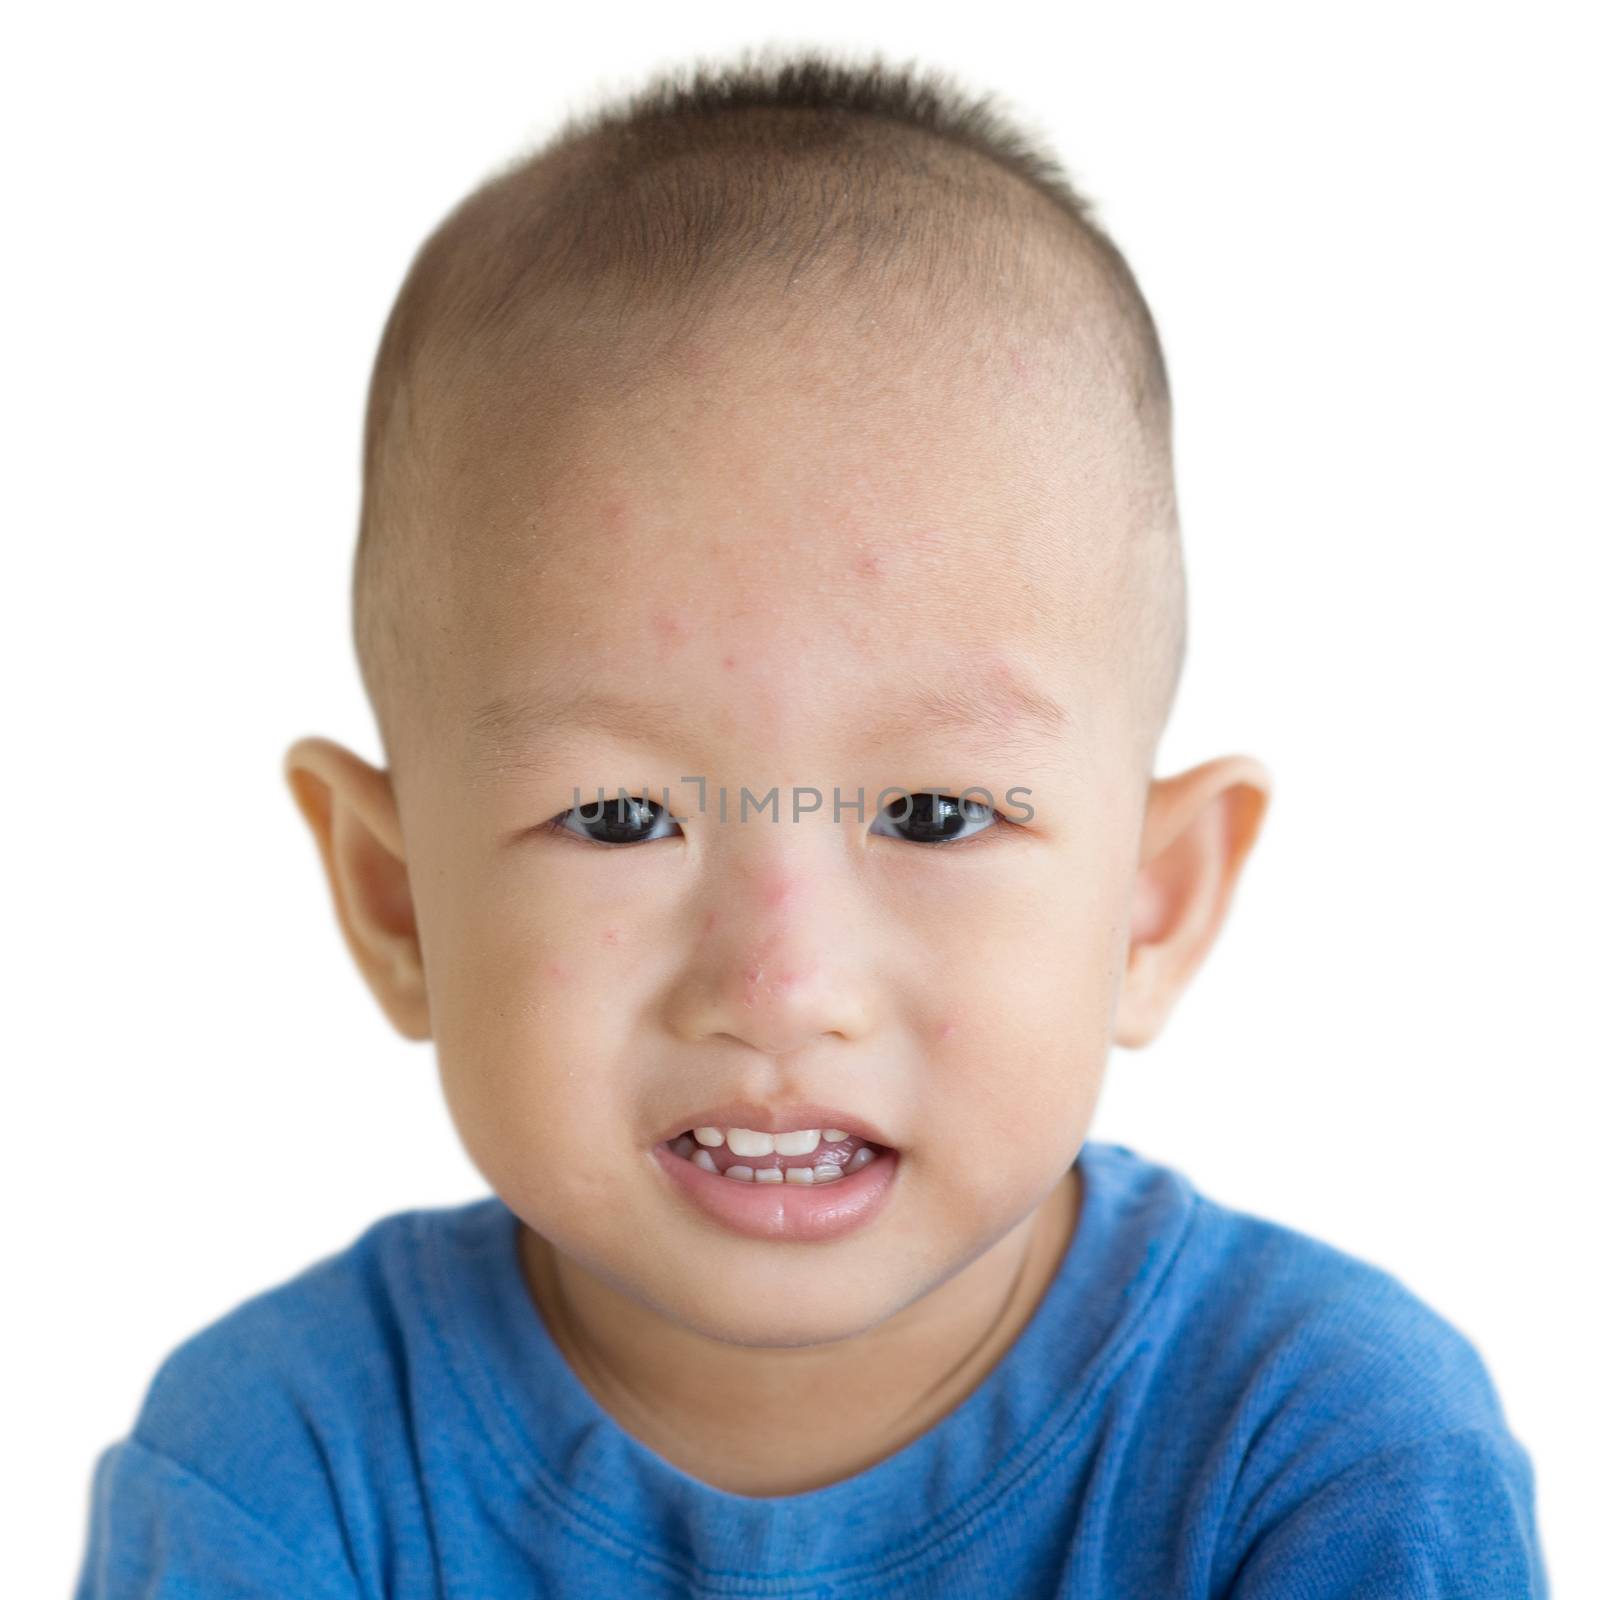 Toddler with red rashes on face by szefei